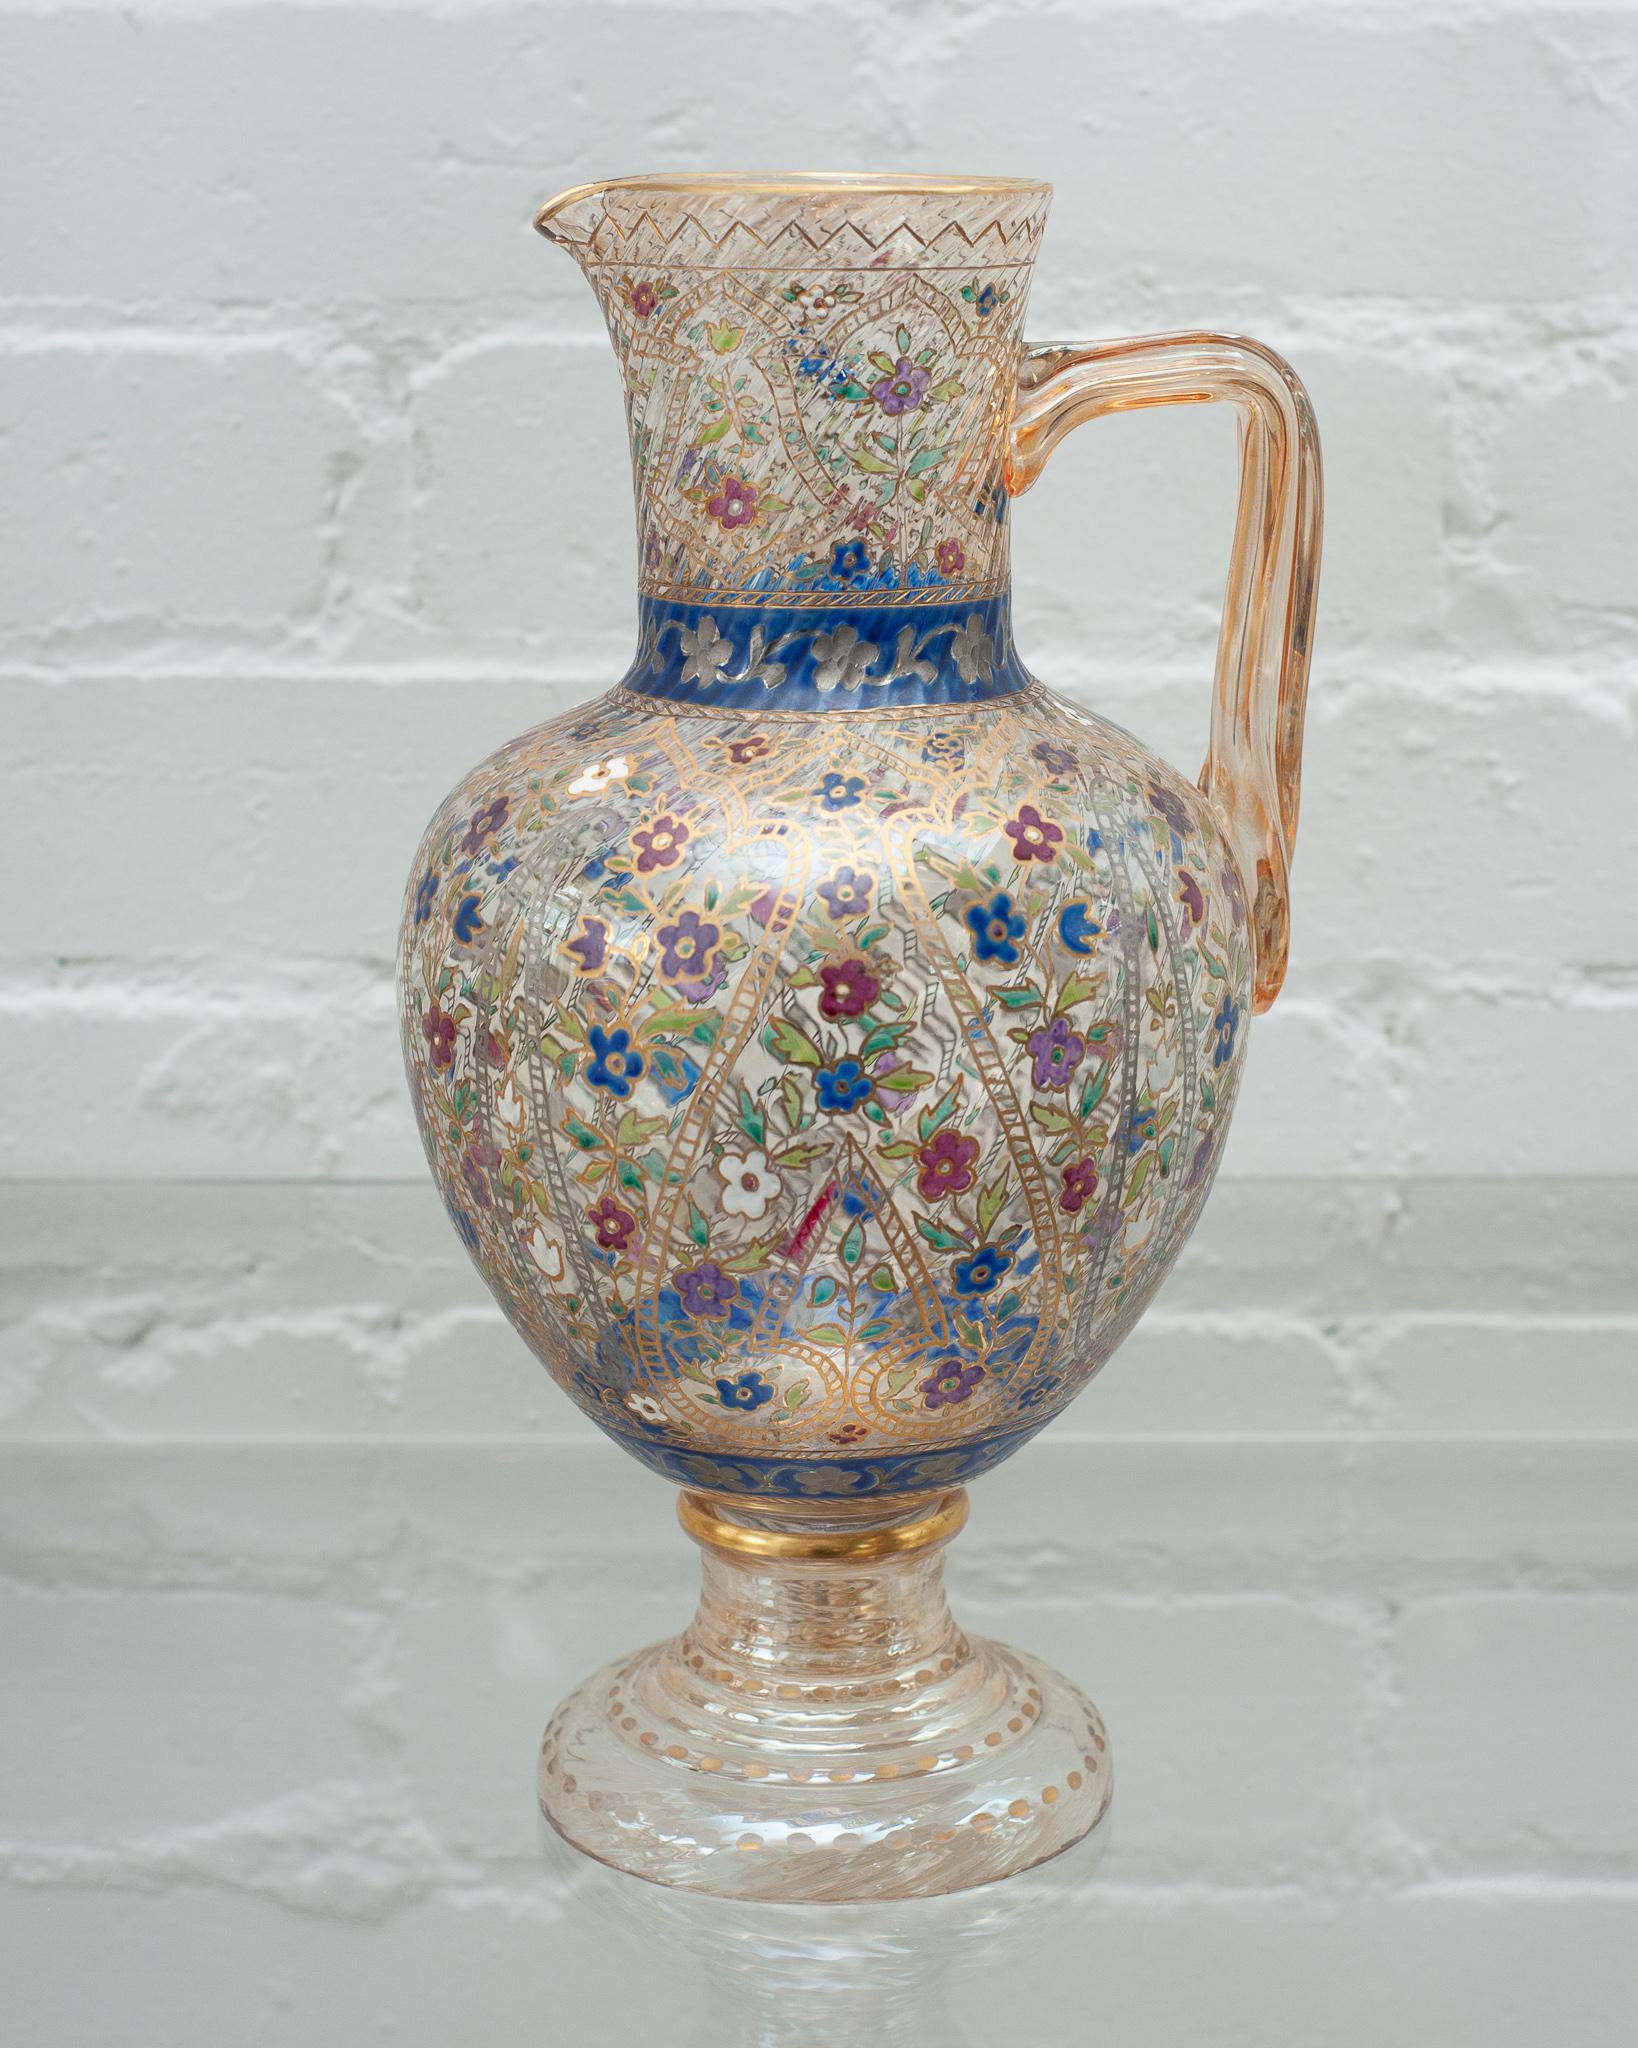 A gorgeous antique Bohemian crystal water pitcher with ornate enamel work, circa 1920. Decorated in floral motifs and gold gilding, this vessel will brighten up any table with its fine craftsmanship and bold colour.